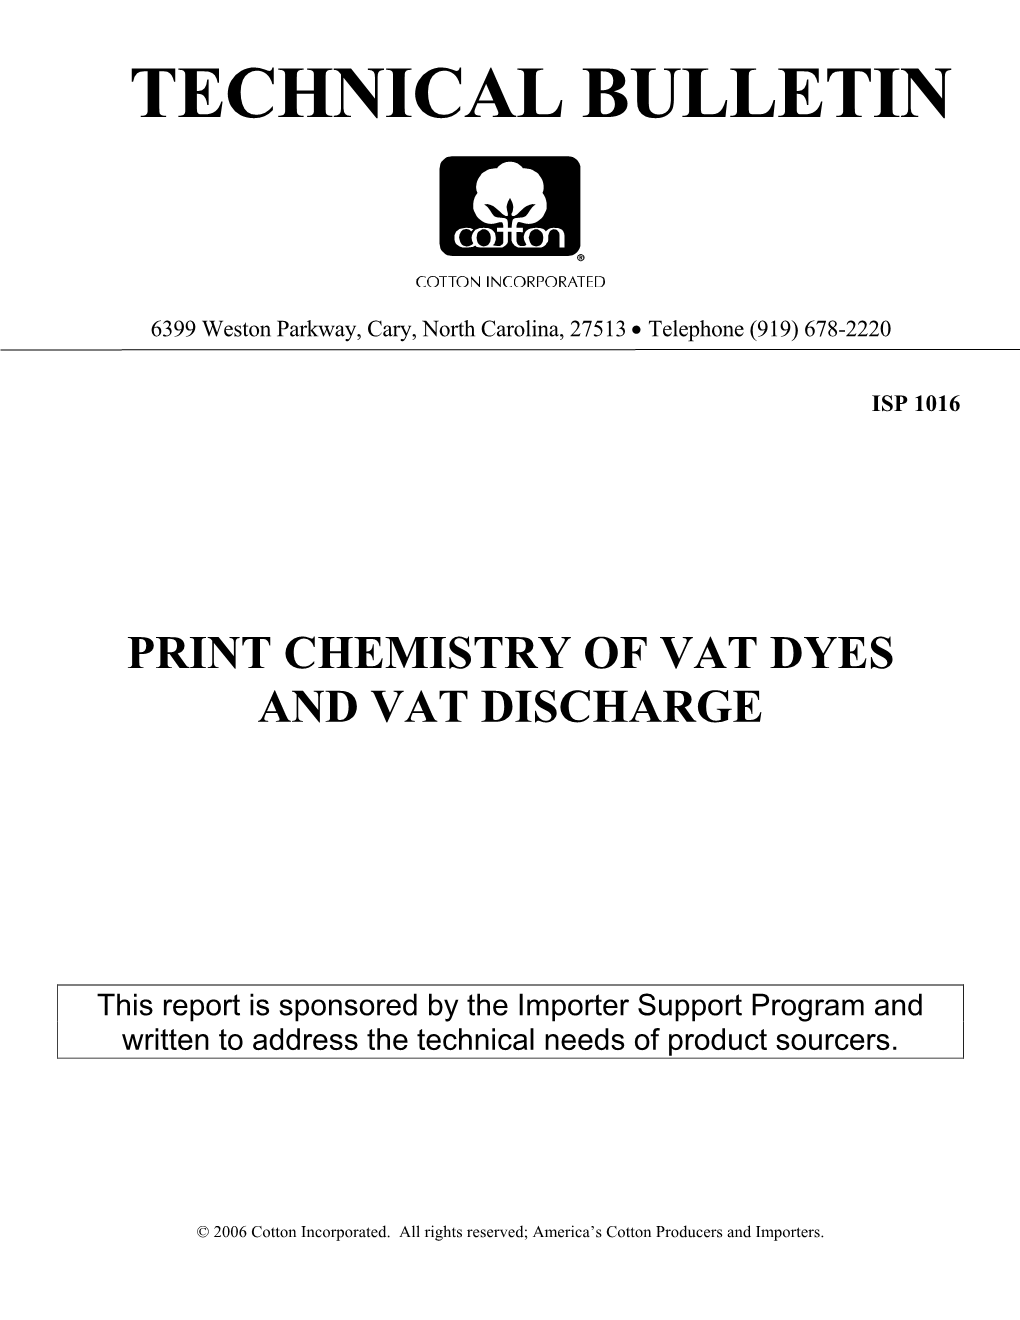 Print Chemistry of Vat Dyes and Vat Discharge